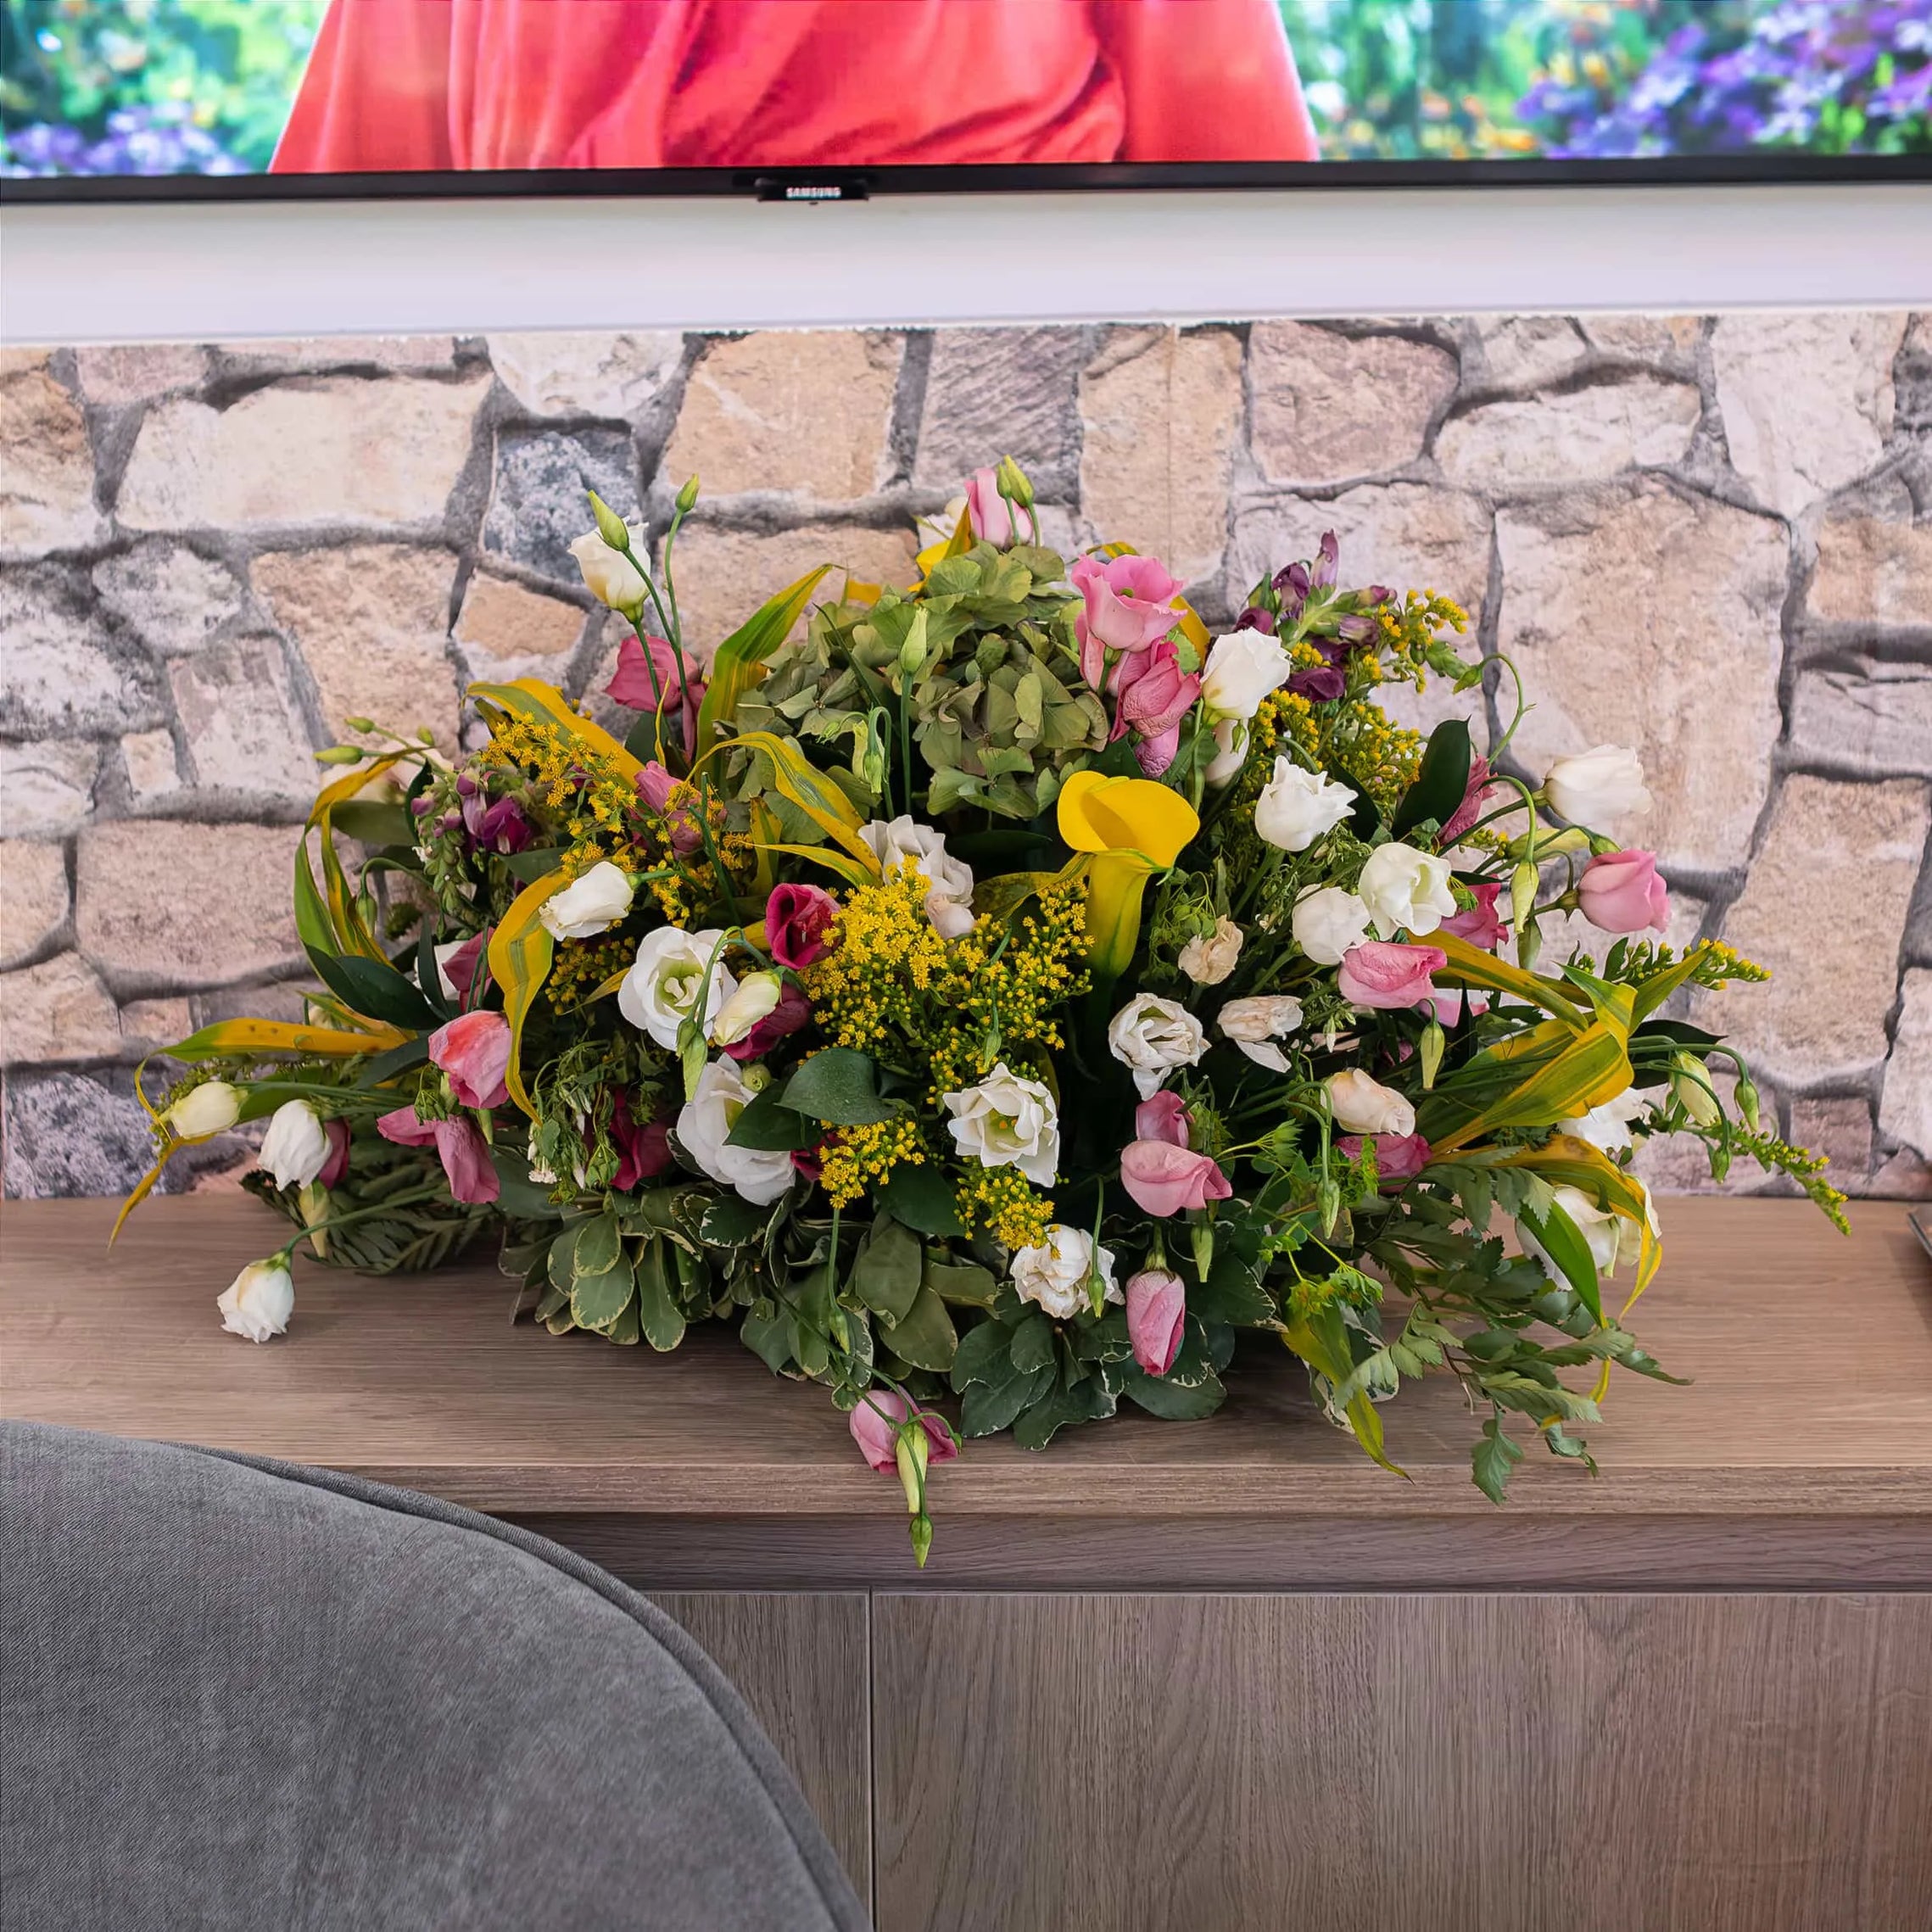 Vibrant mix of fresh flowers - floral arrangement designed by Event Florist Amaranté London for WTM: yellow calla lilies and pink roses on a rustic stone-textured counter.